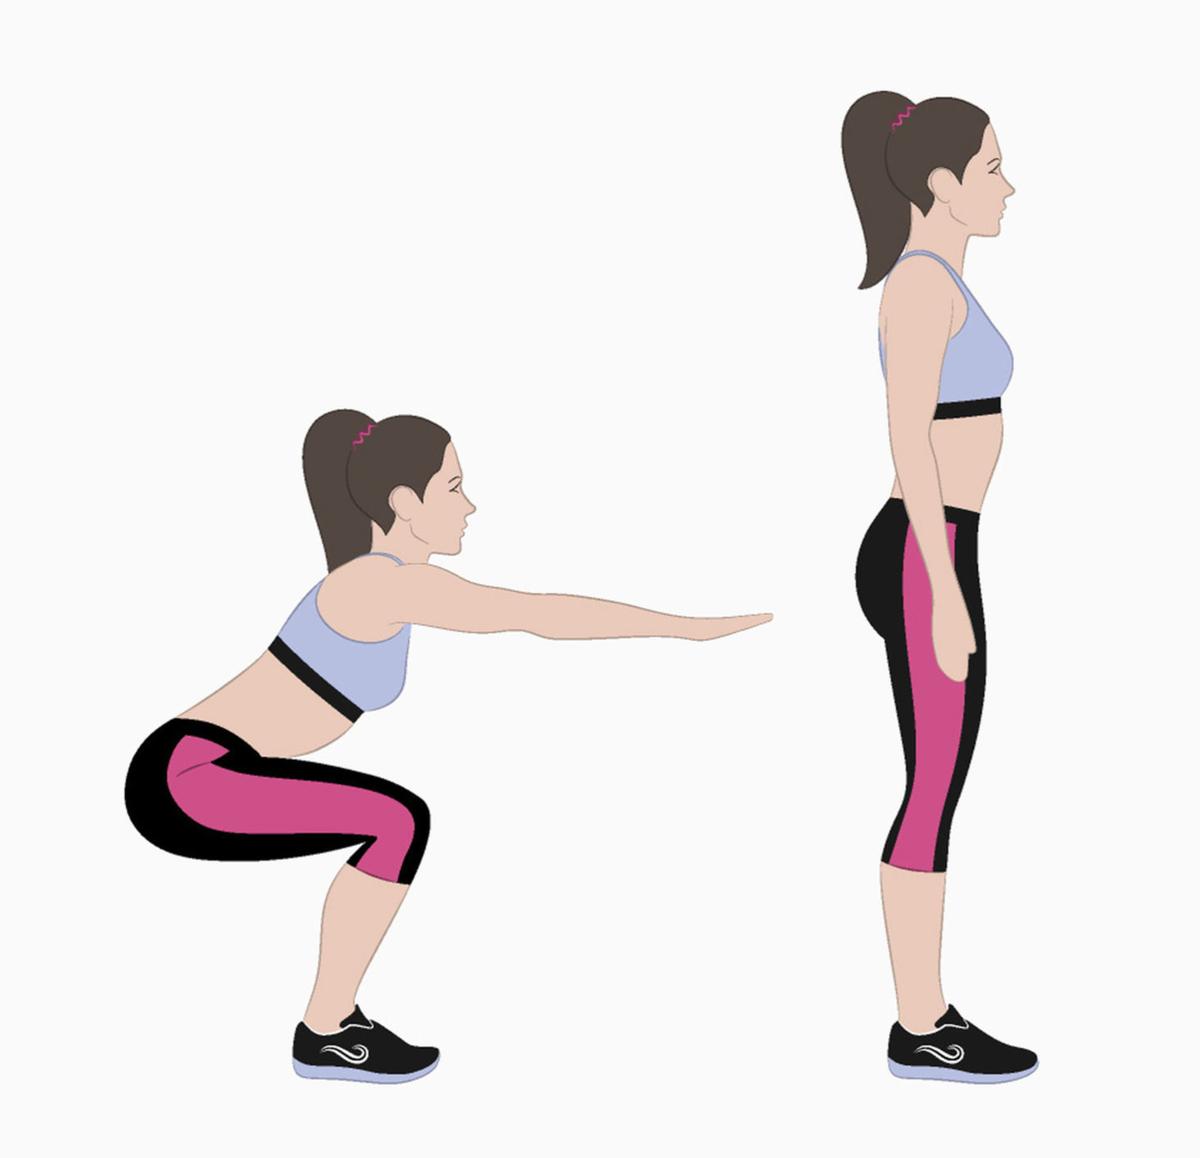 Ready to exercise at home? Our Week 3 workout focuses on the lower body ...